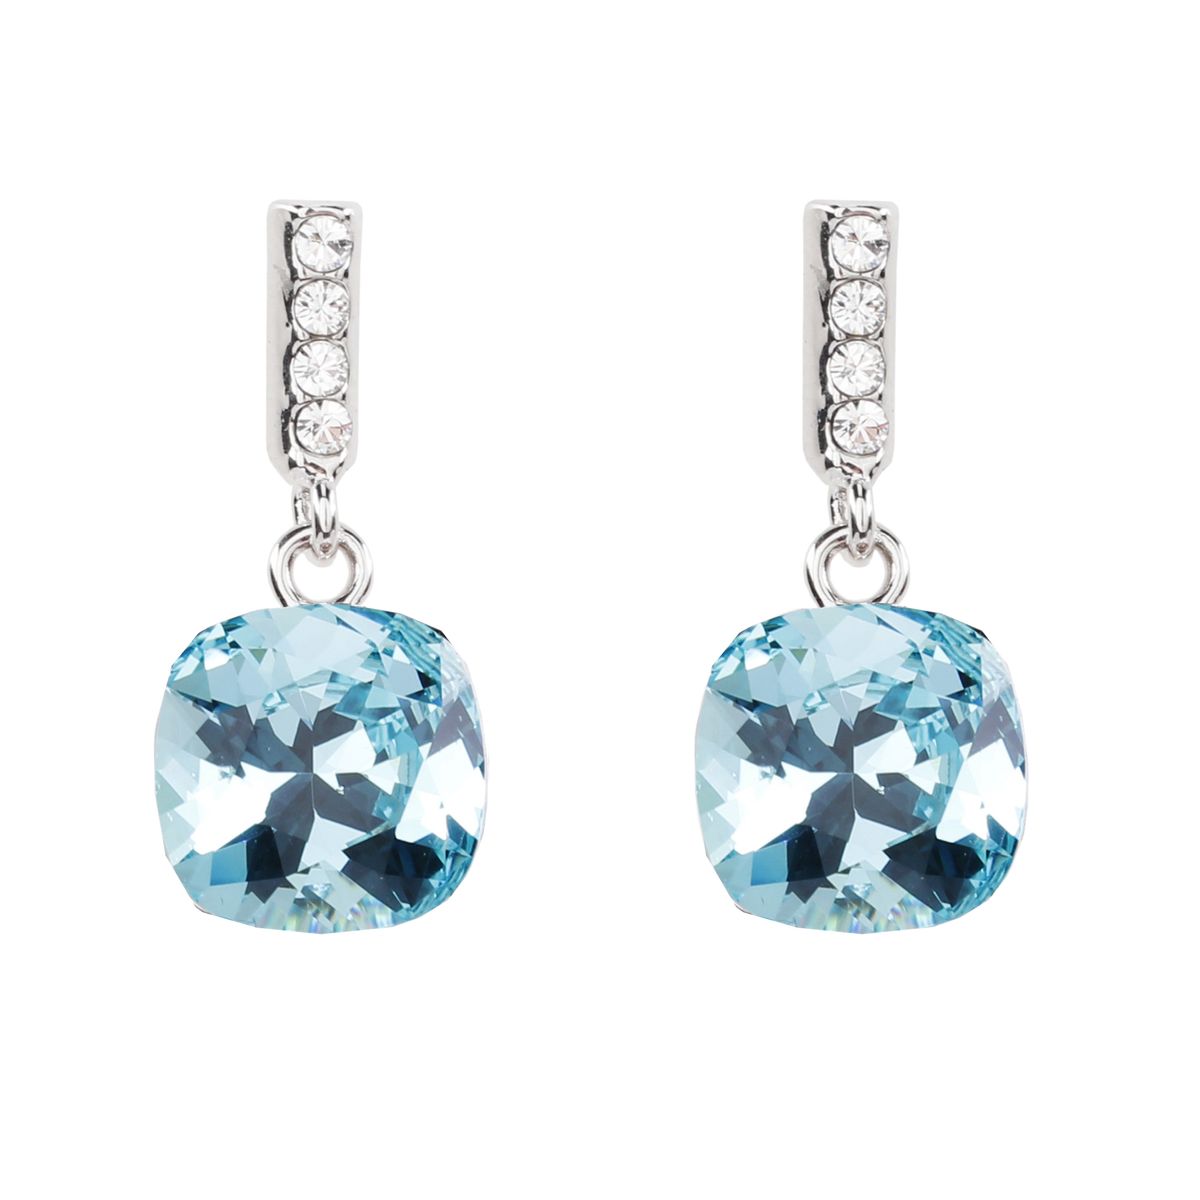 Civetta Spark Jia Jia Earring with Aquamarine Crystal | Shop Today. Get ...